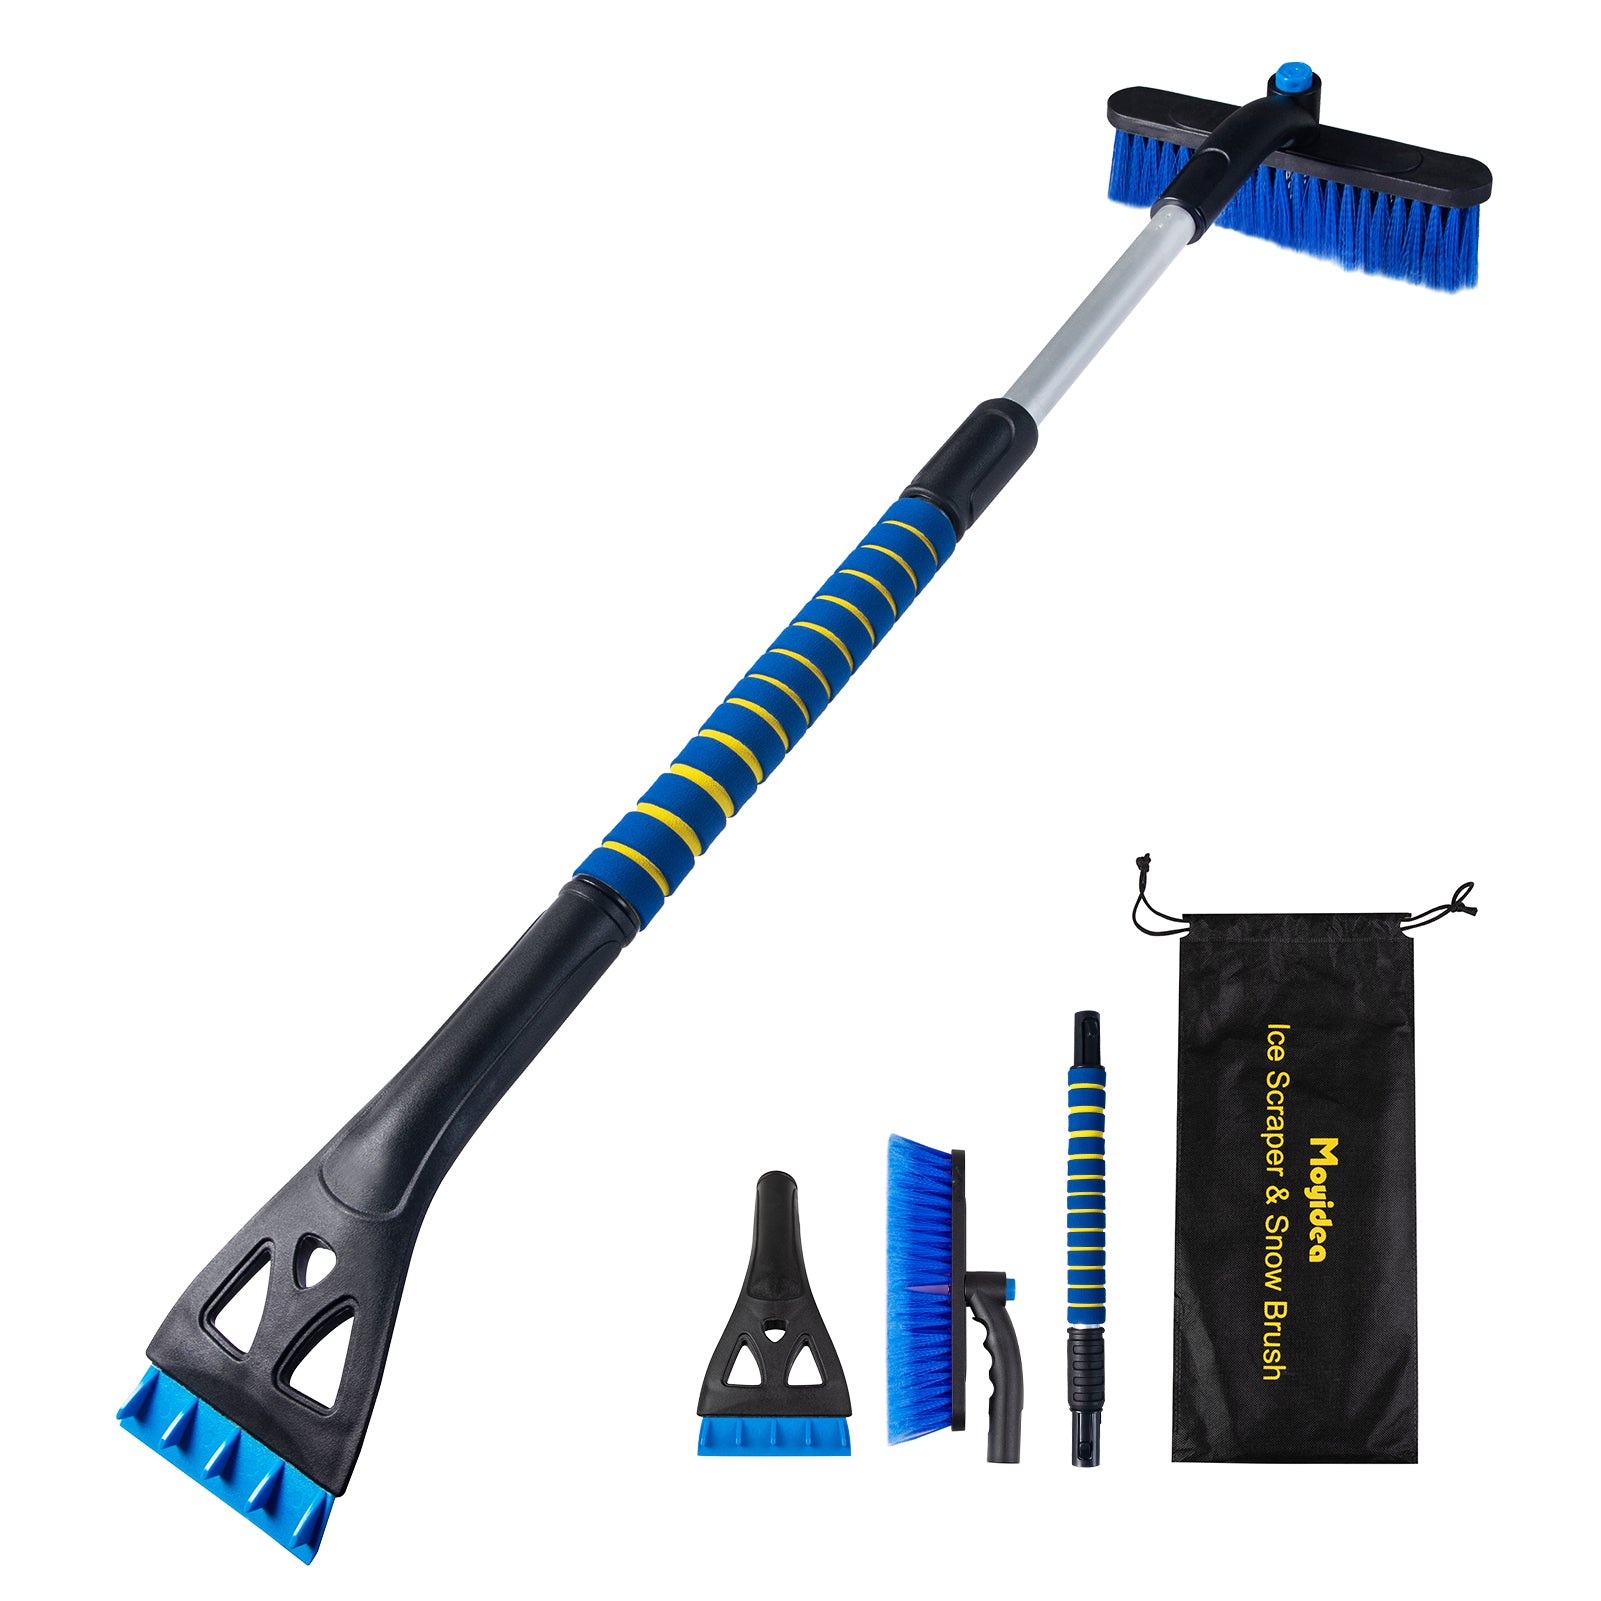 36" Extendable Ice Scraper Snow Brush Detachable Snow Removal Tool with Ergonomic Foam Grip for Car SUV Truck (Blue)